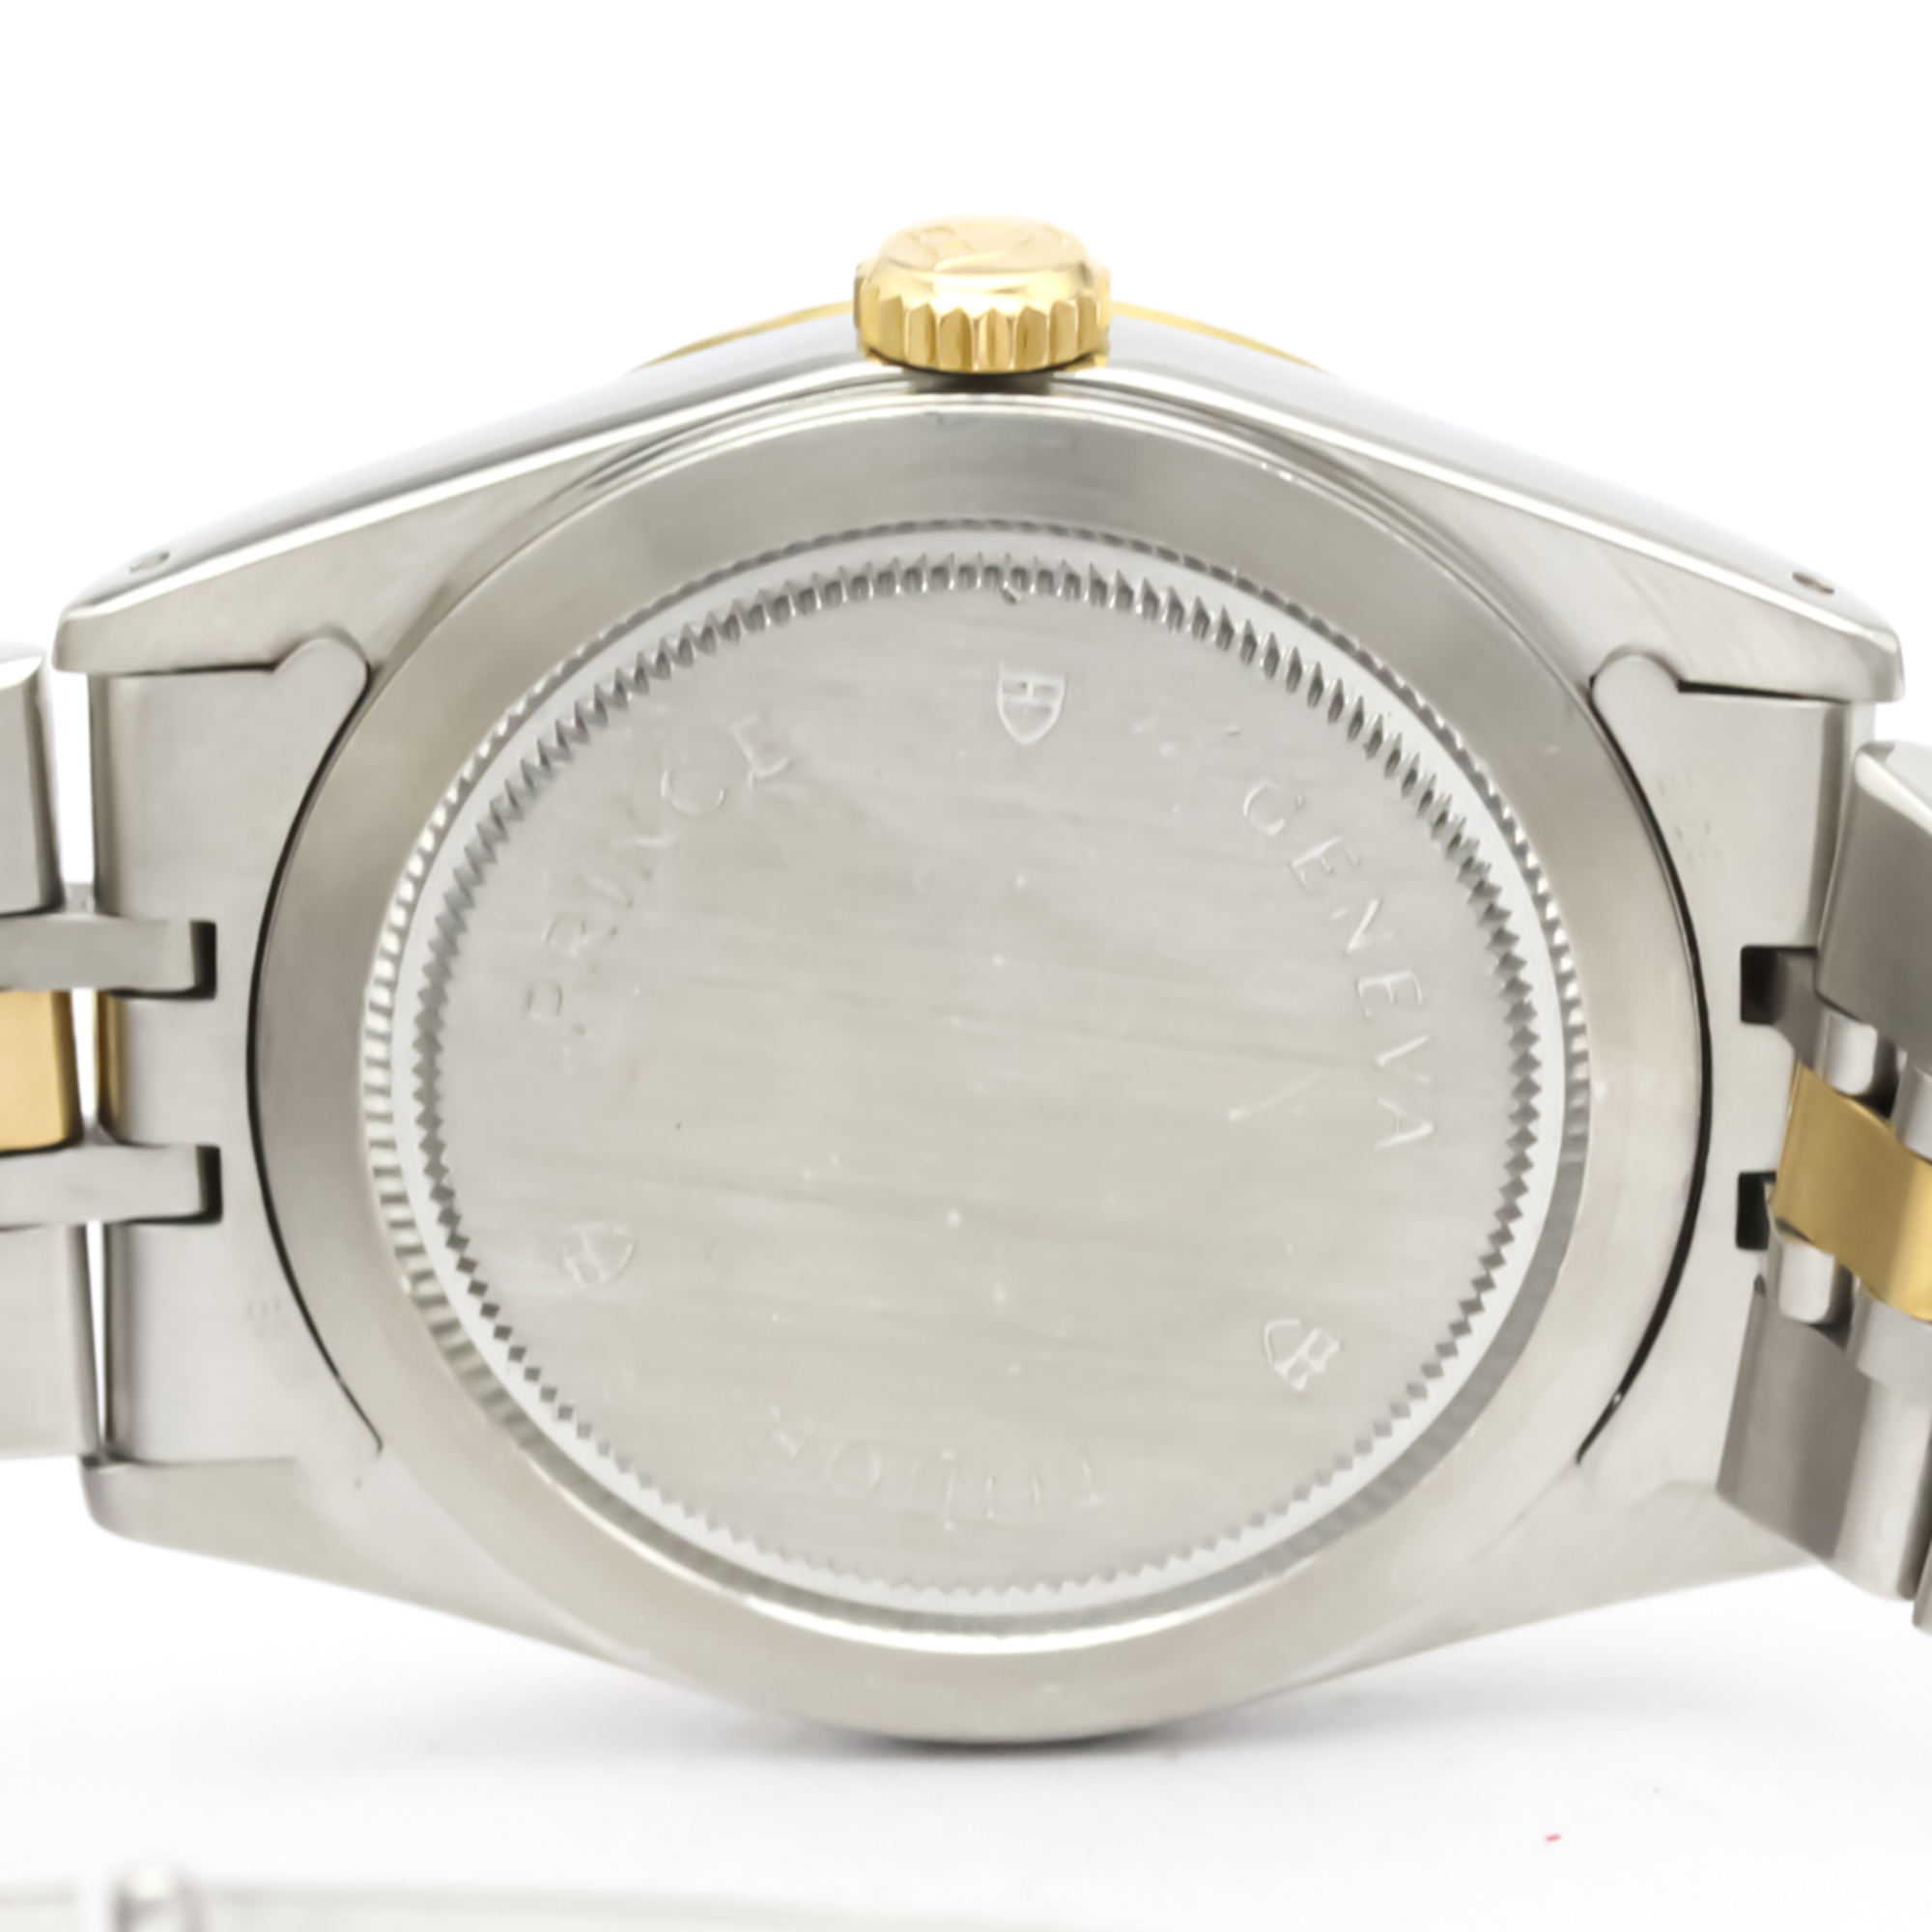 Tudor Prince Date Day Automatic Stainless Steel,Yellow Gold (18K) Men's Dress Watch 76213